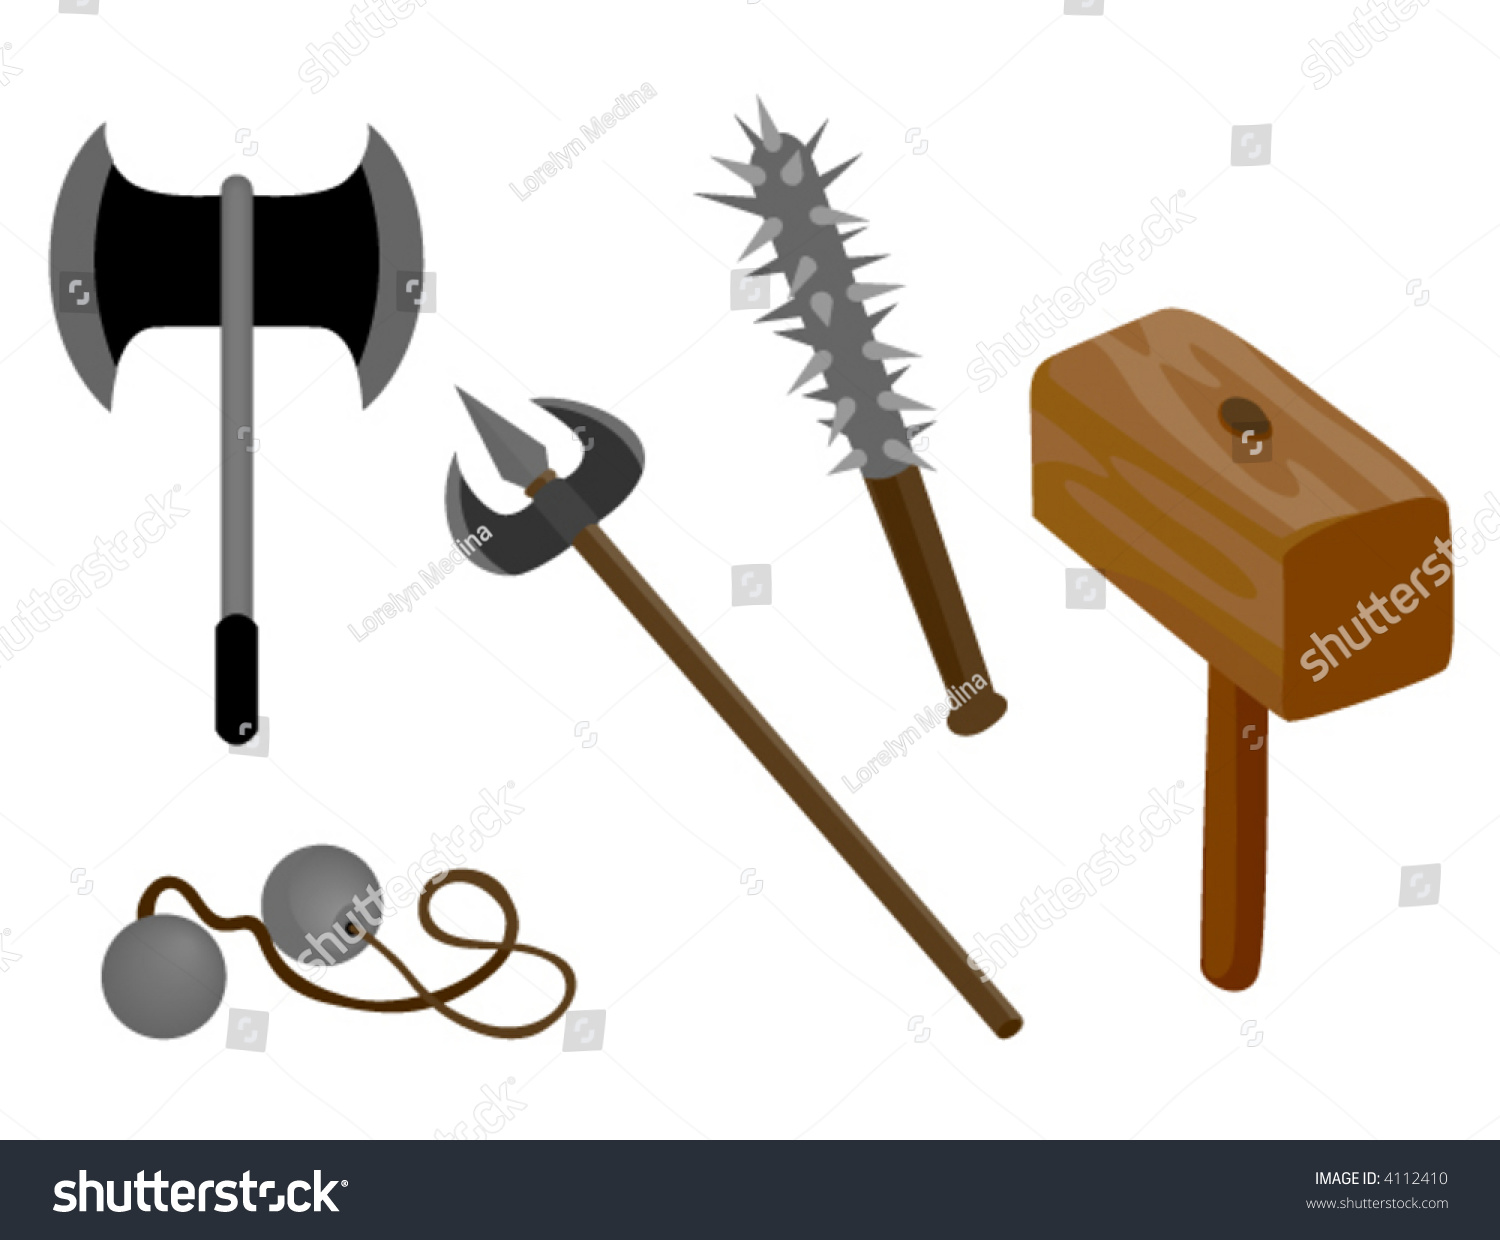 war weapons clipart - photo #36